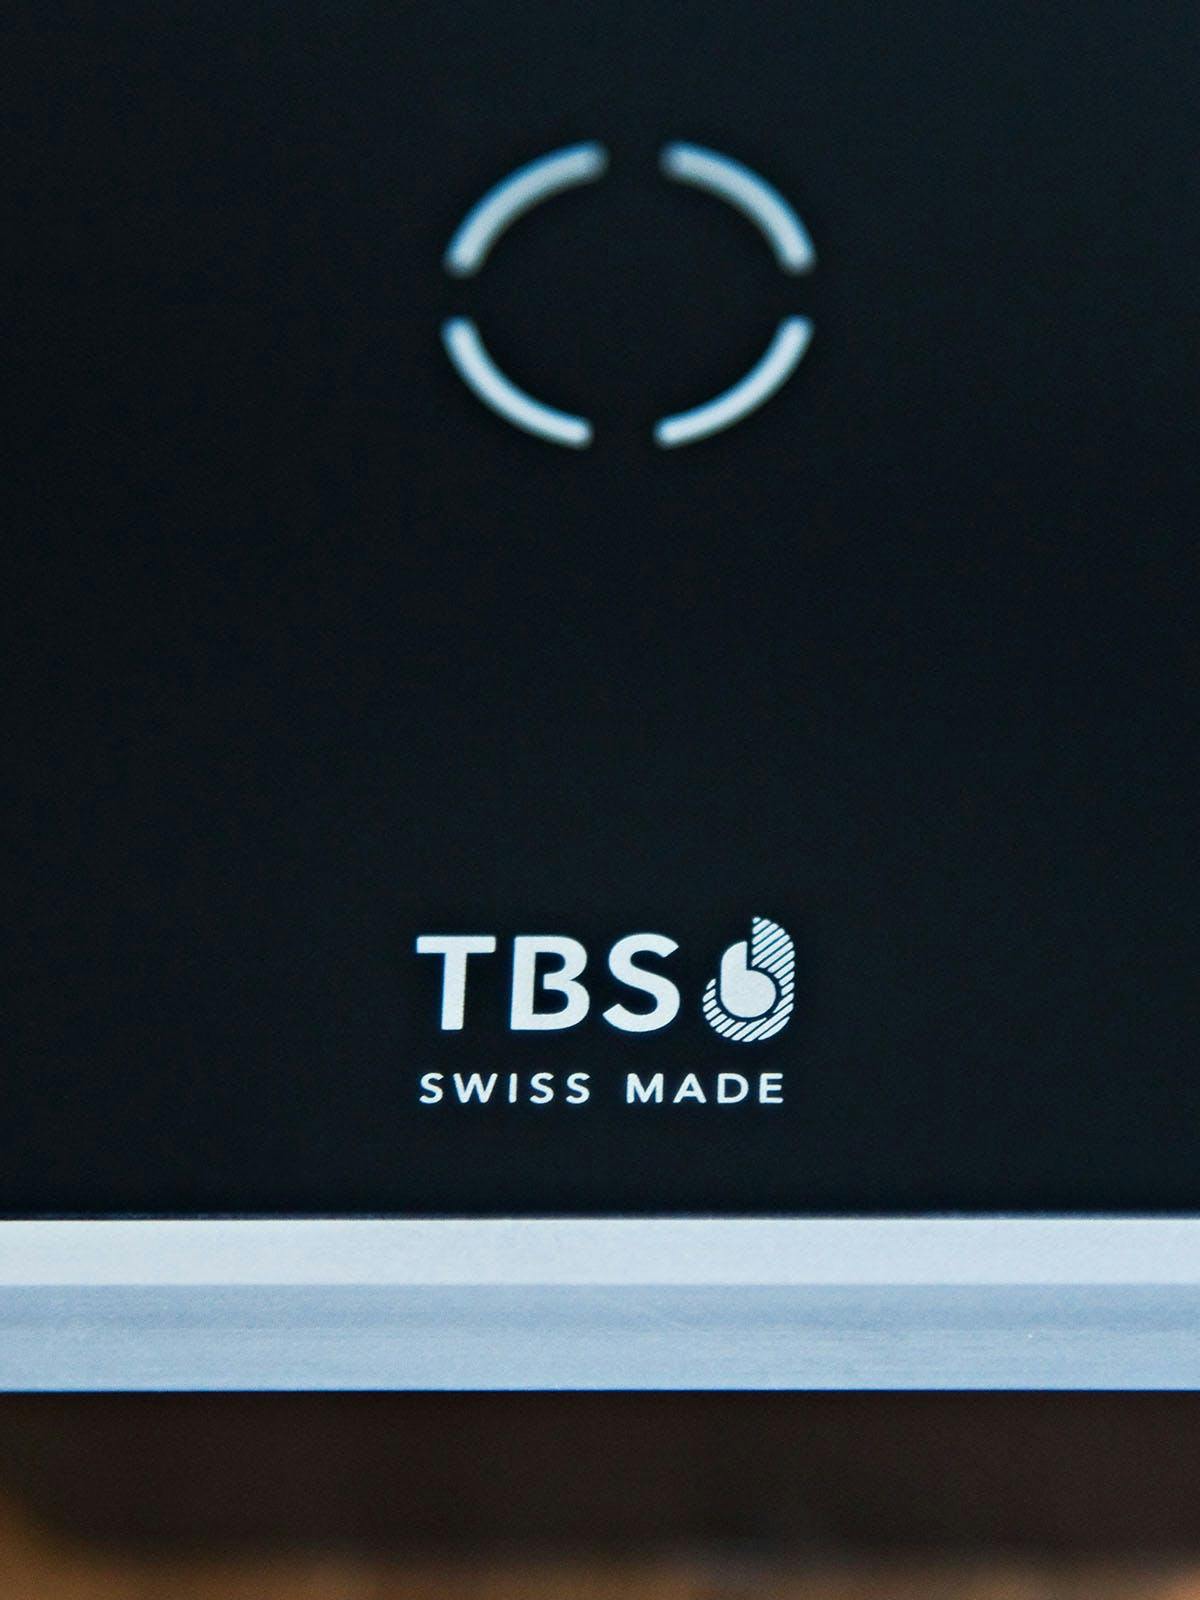 Brand design for TBS by FOND Design